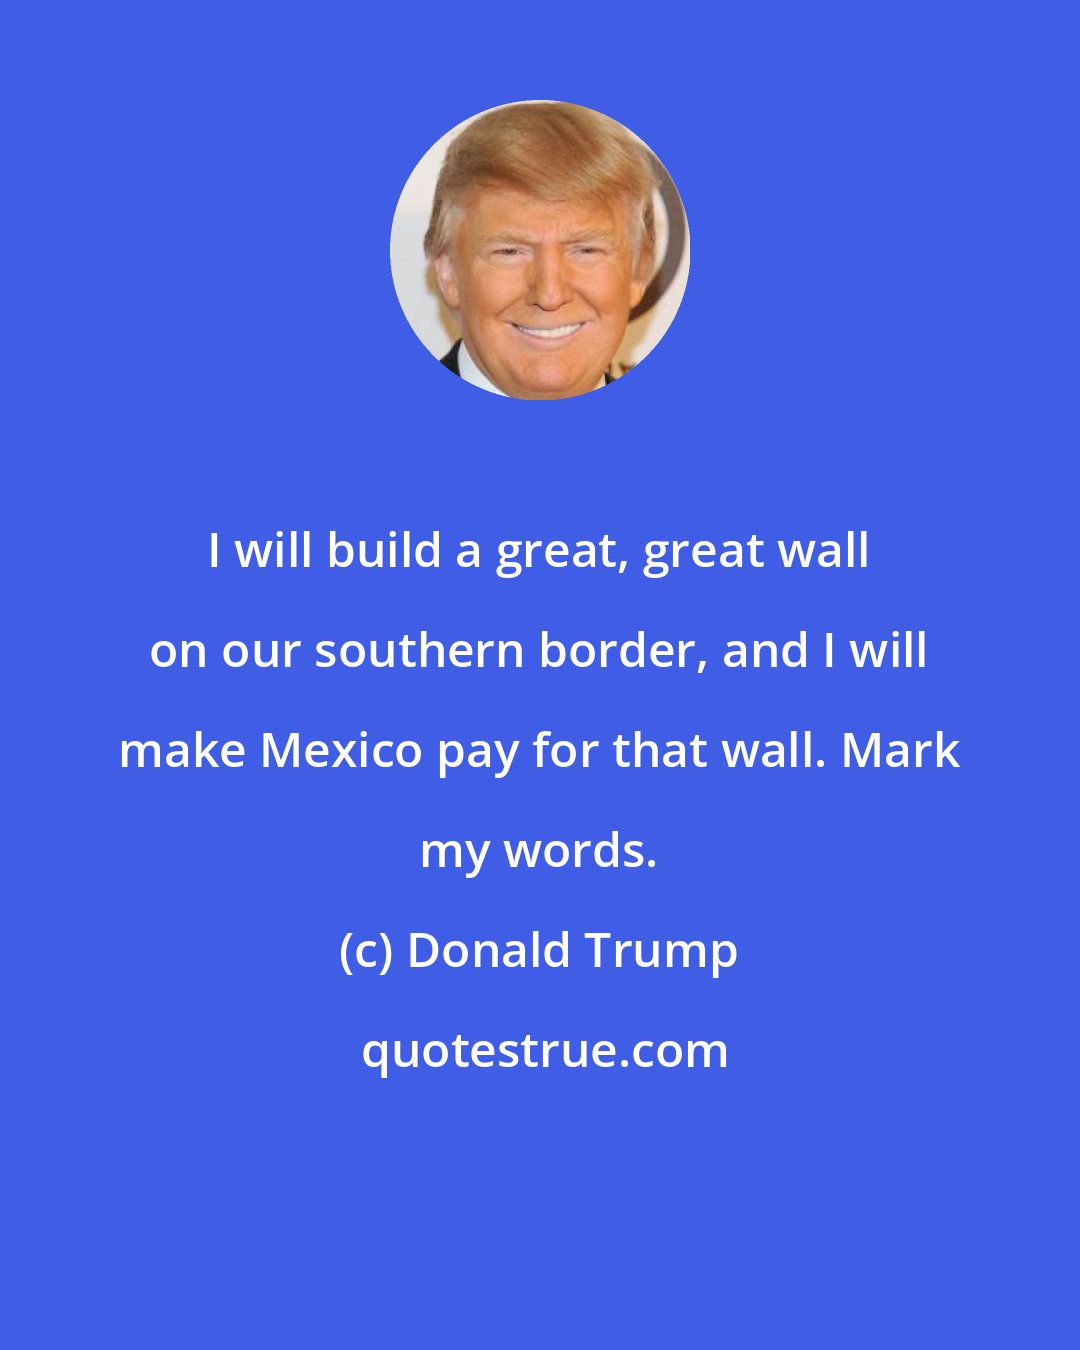 Donald Trump: I will build a great, great wall on our southern border, and I will make Mexico pay for that wall. Mark my words.